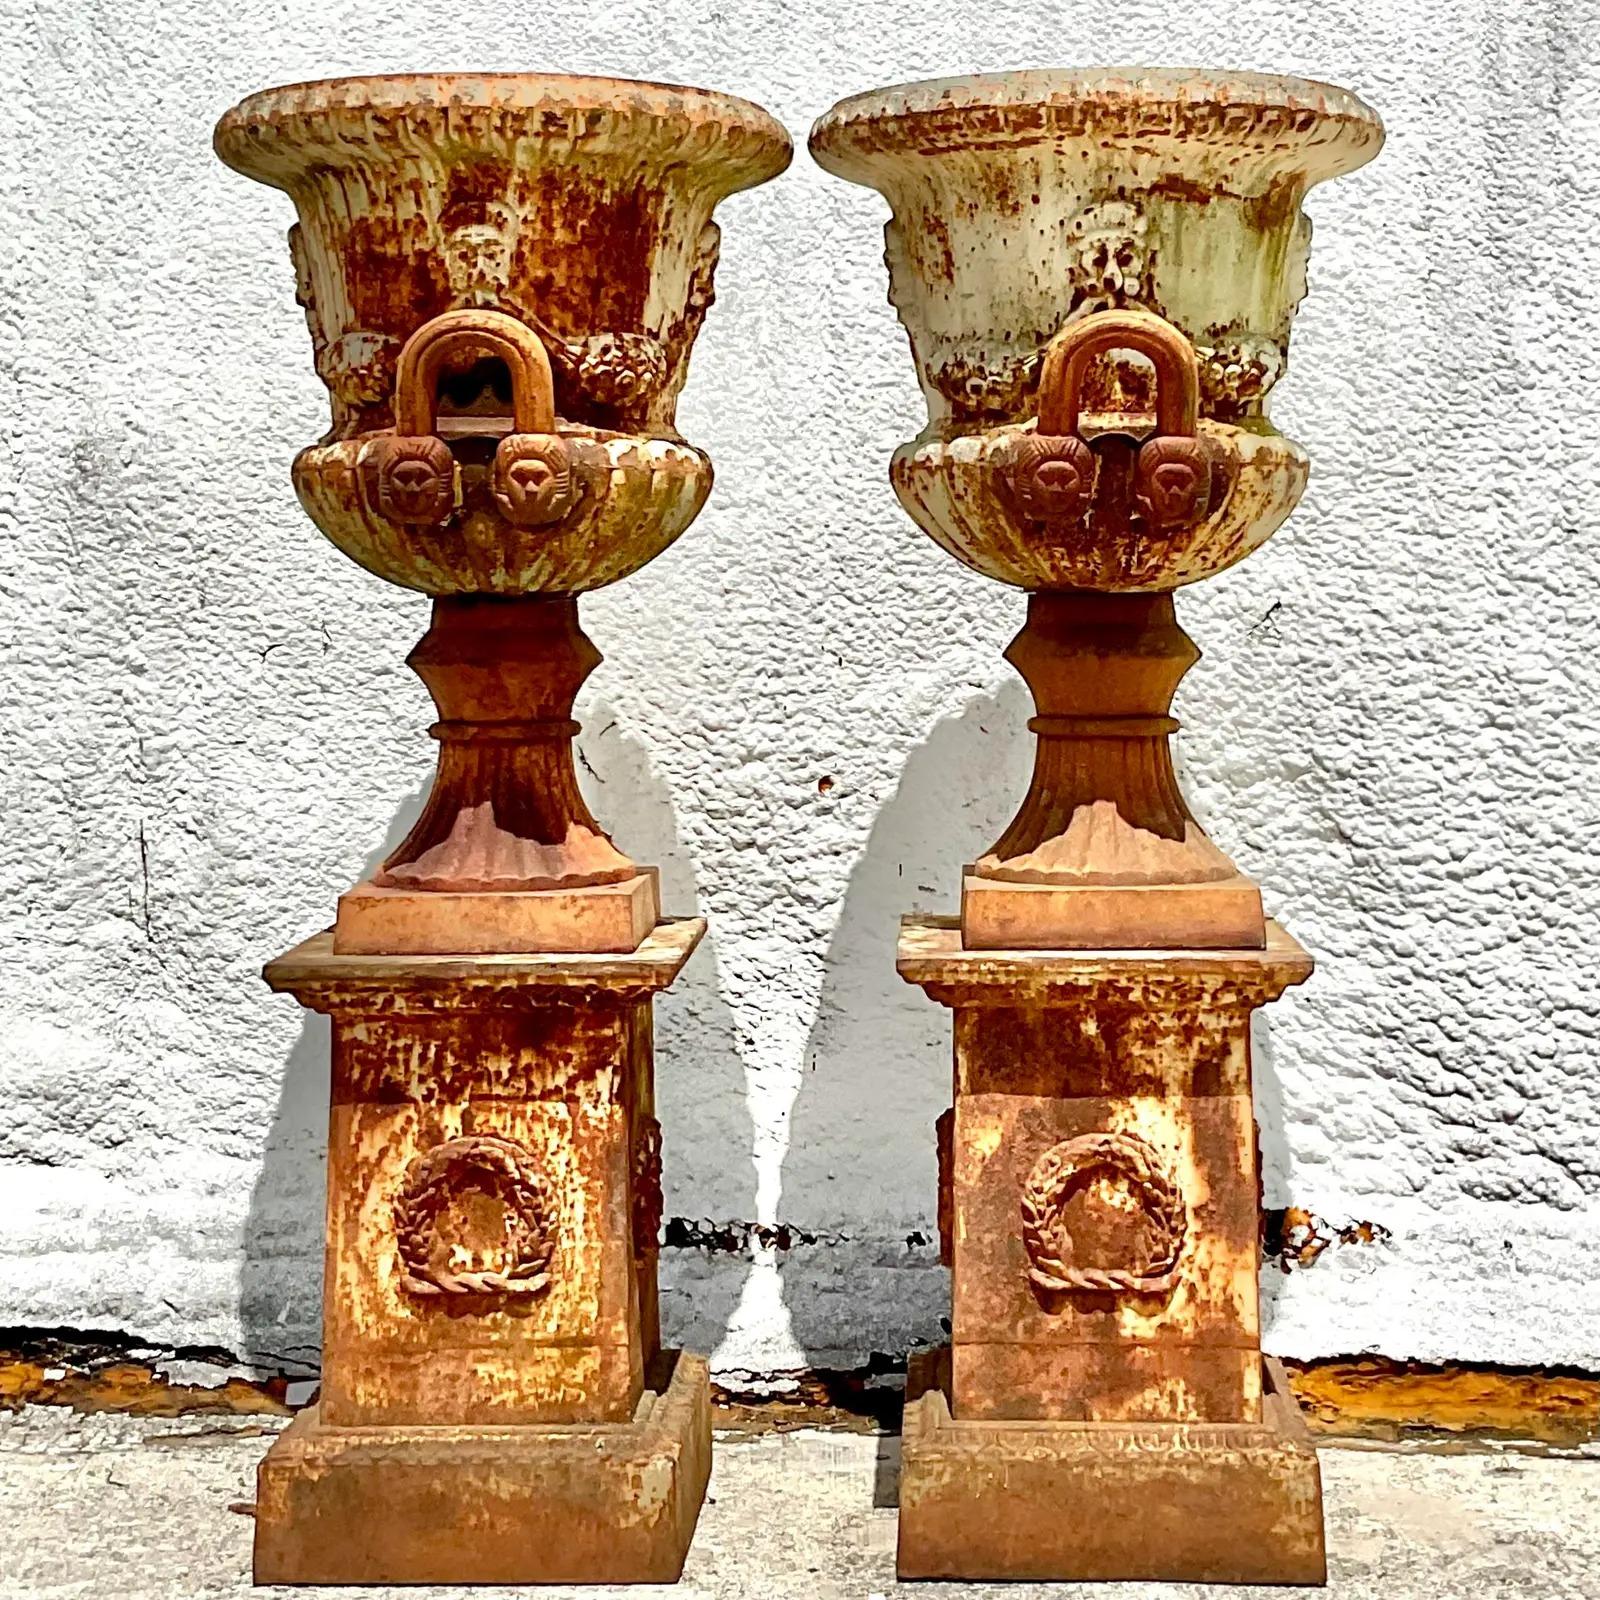 Vintage Monumental Wrought Iron Urns - a Pair For Sale 3